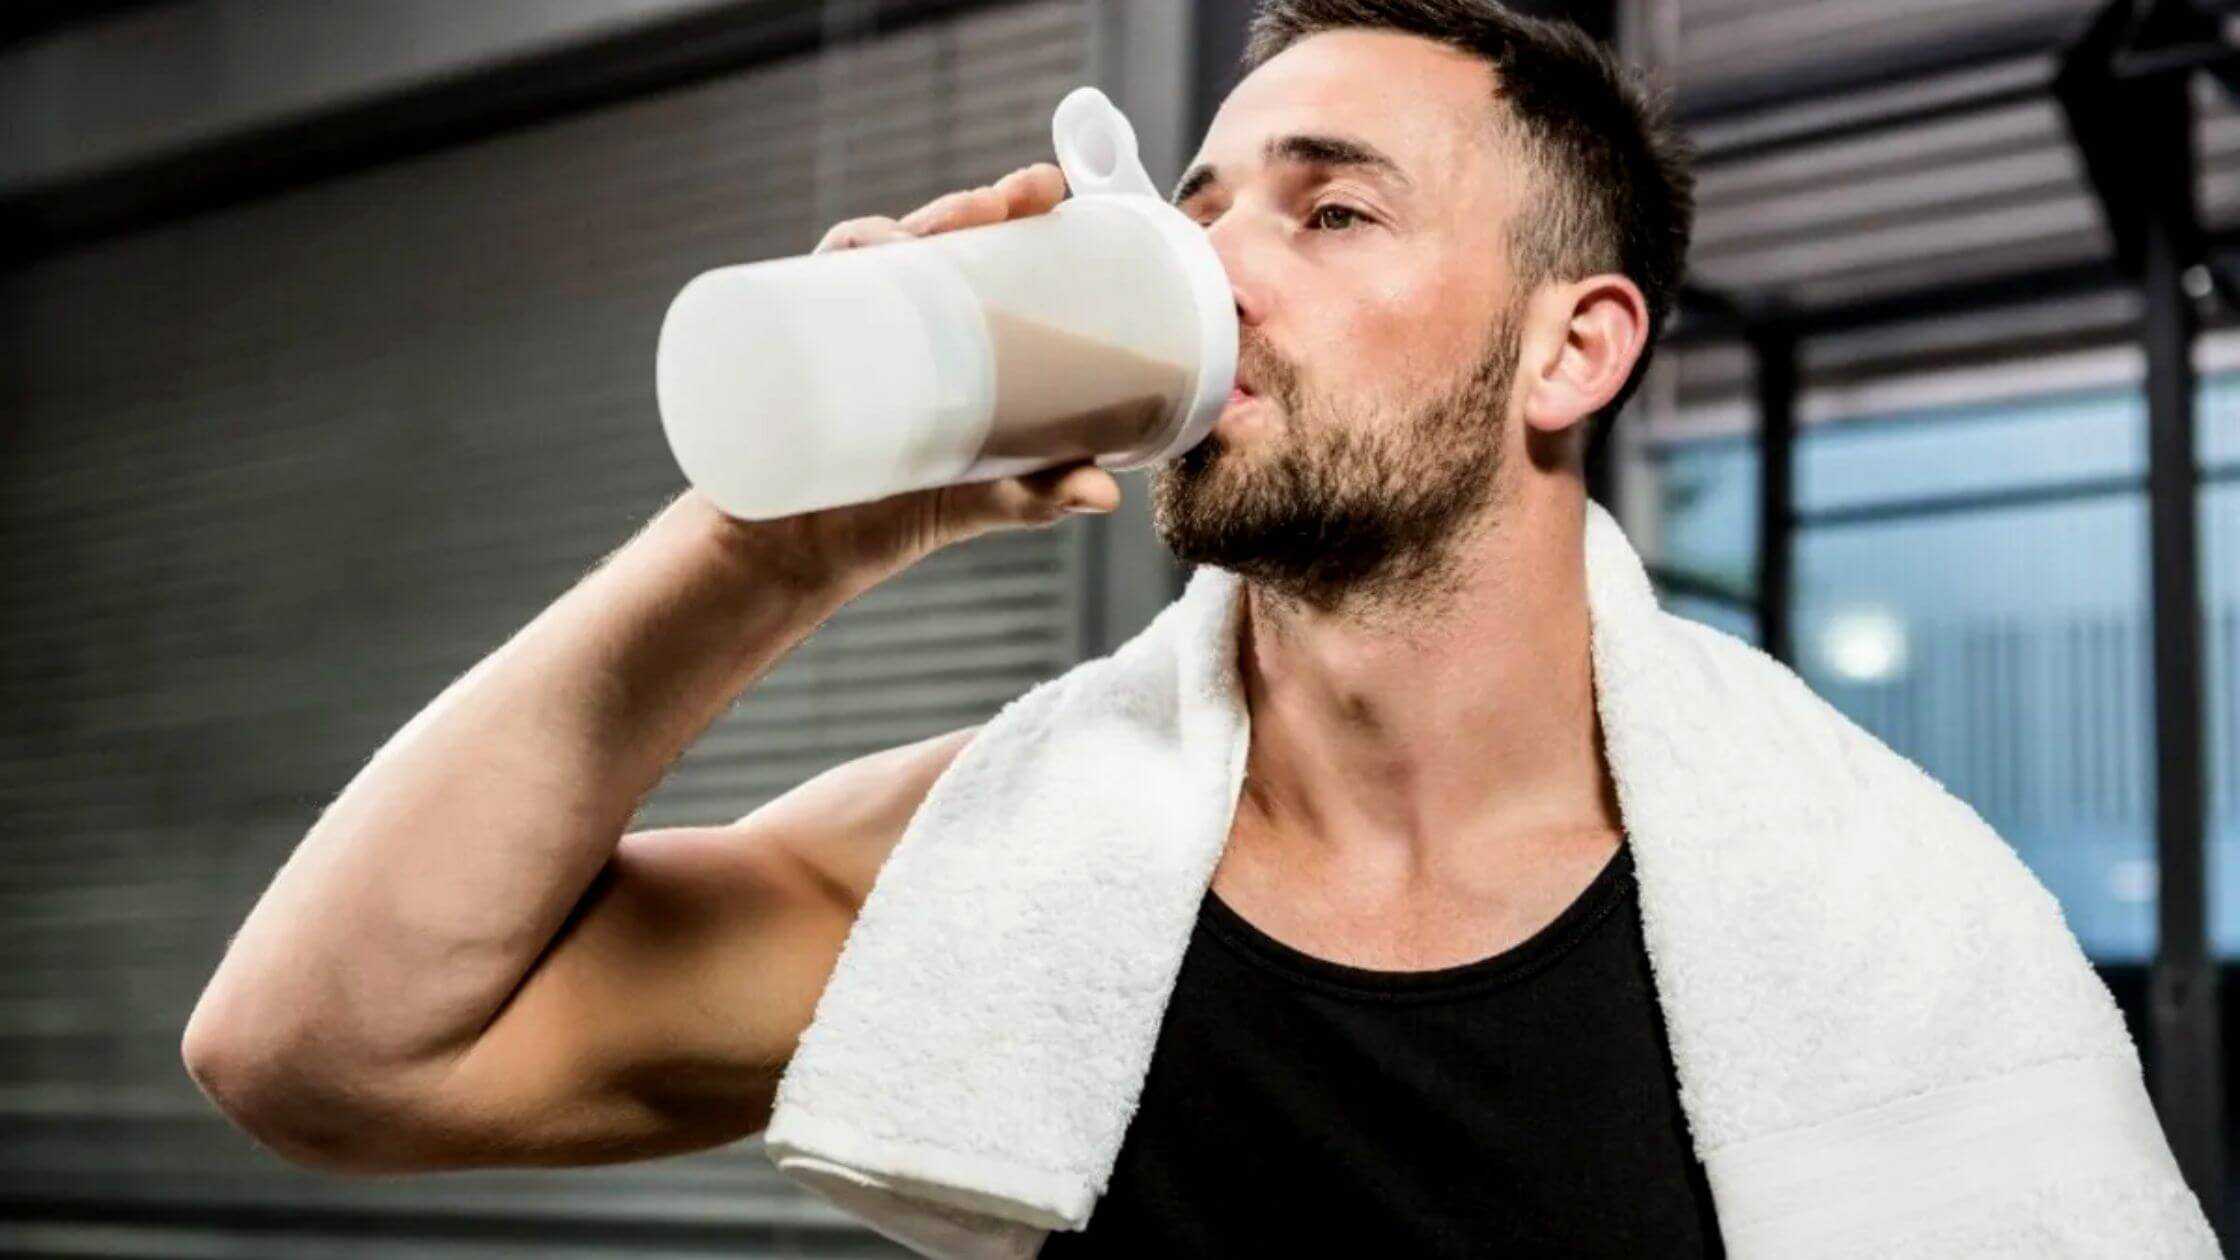 Market Size & Growth Forecast For Pre-Workout Supplements 2022